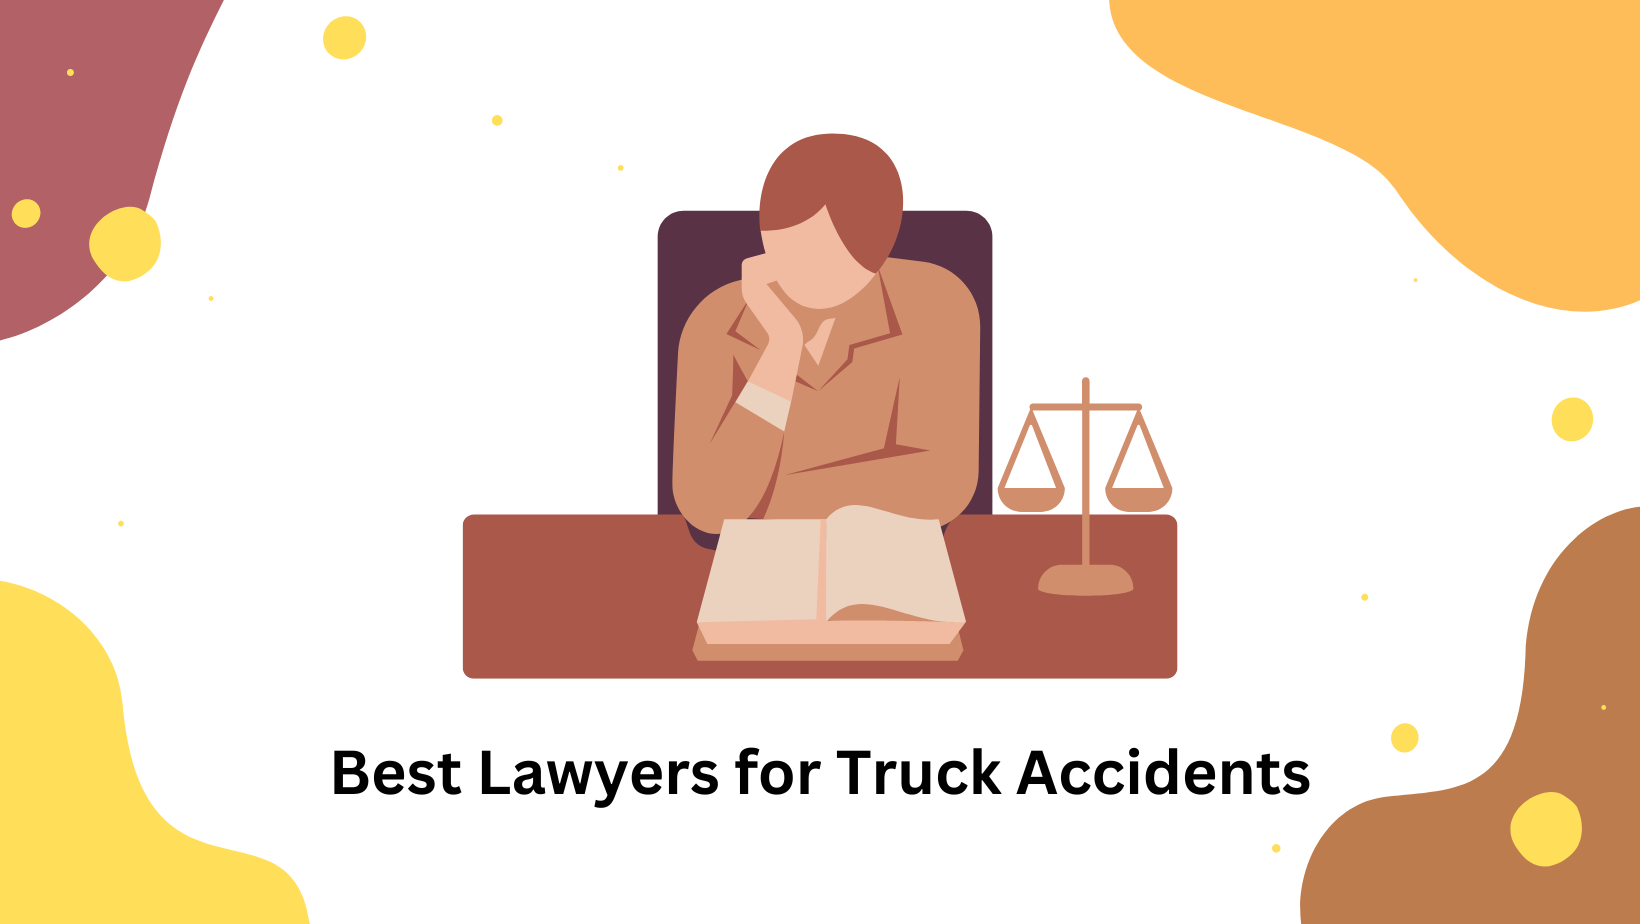 Best Lawyers for Truck Accidents